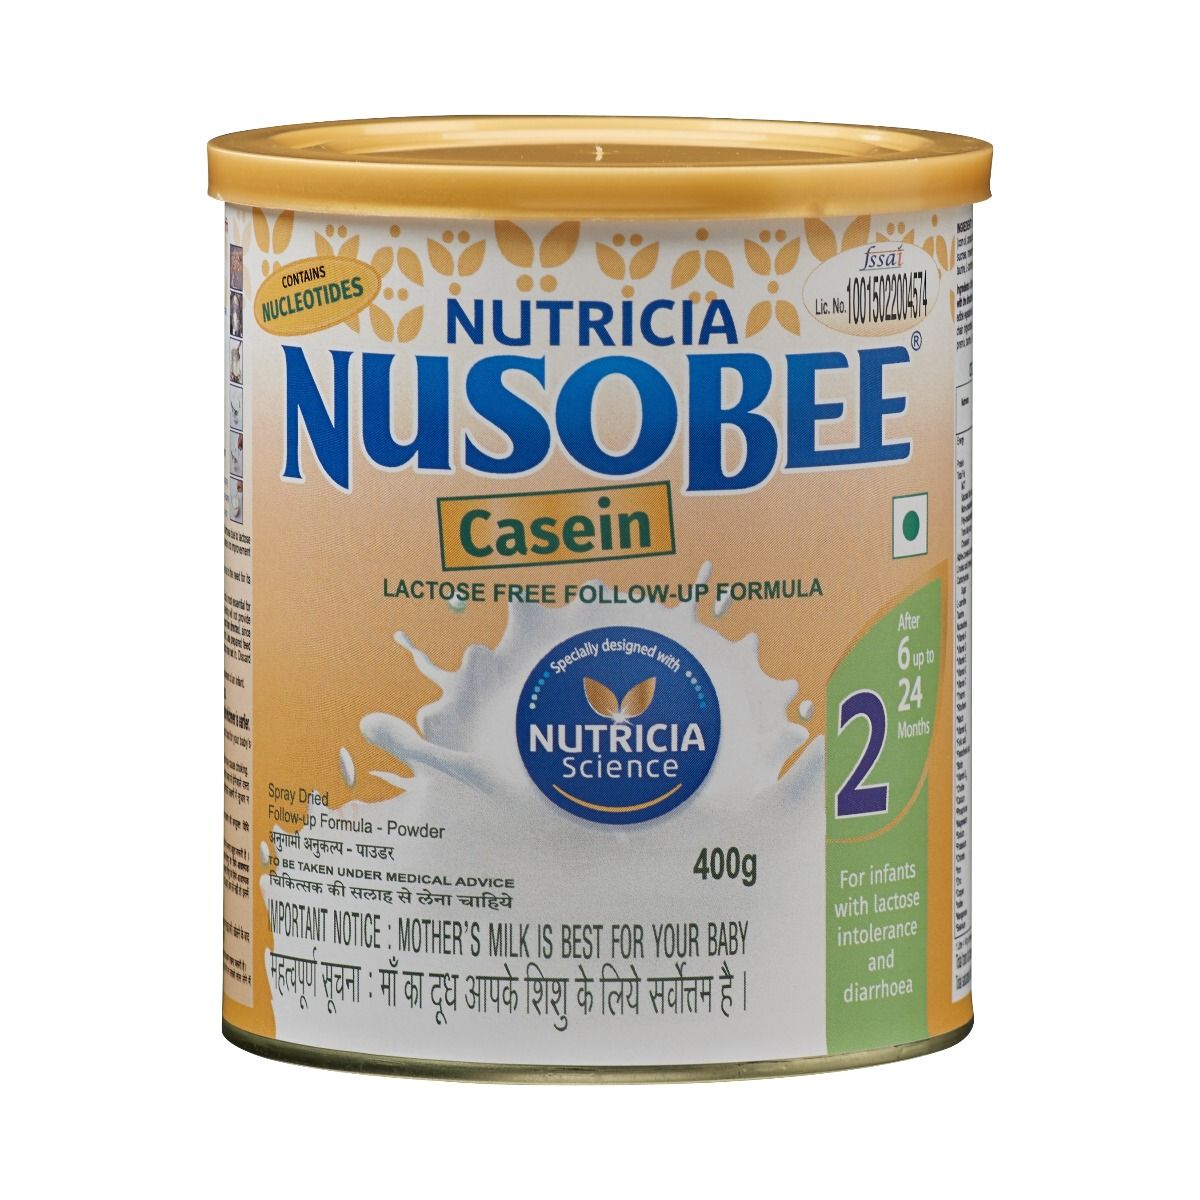 Buy Nutricia Nusobee Casein Follow-Up Formula Stage 2, 6 to 24 Months, 400 gm Tin Online